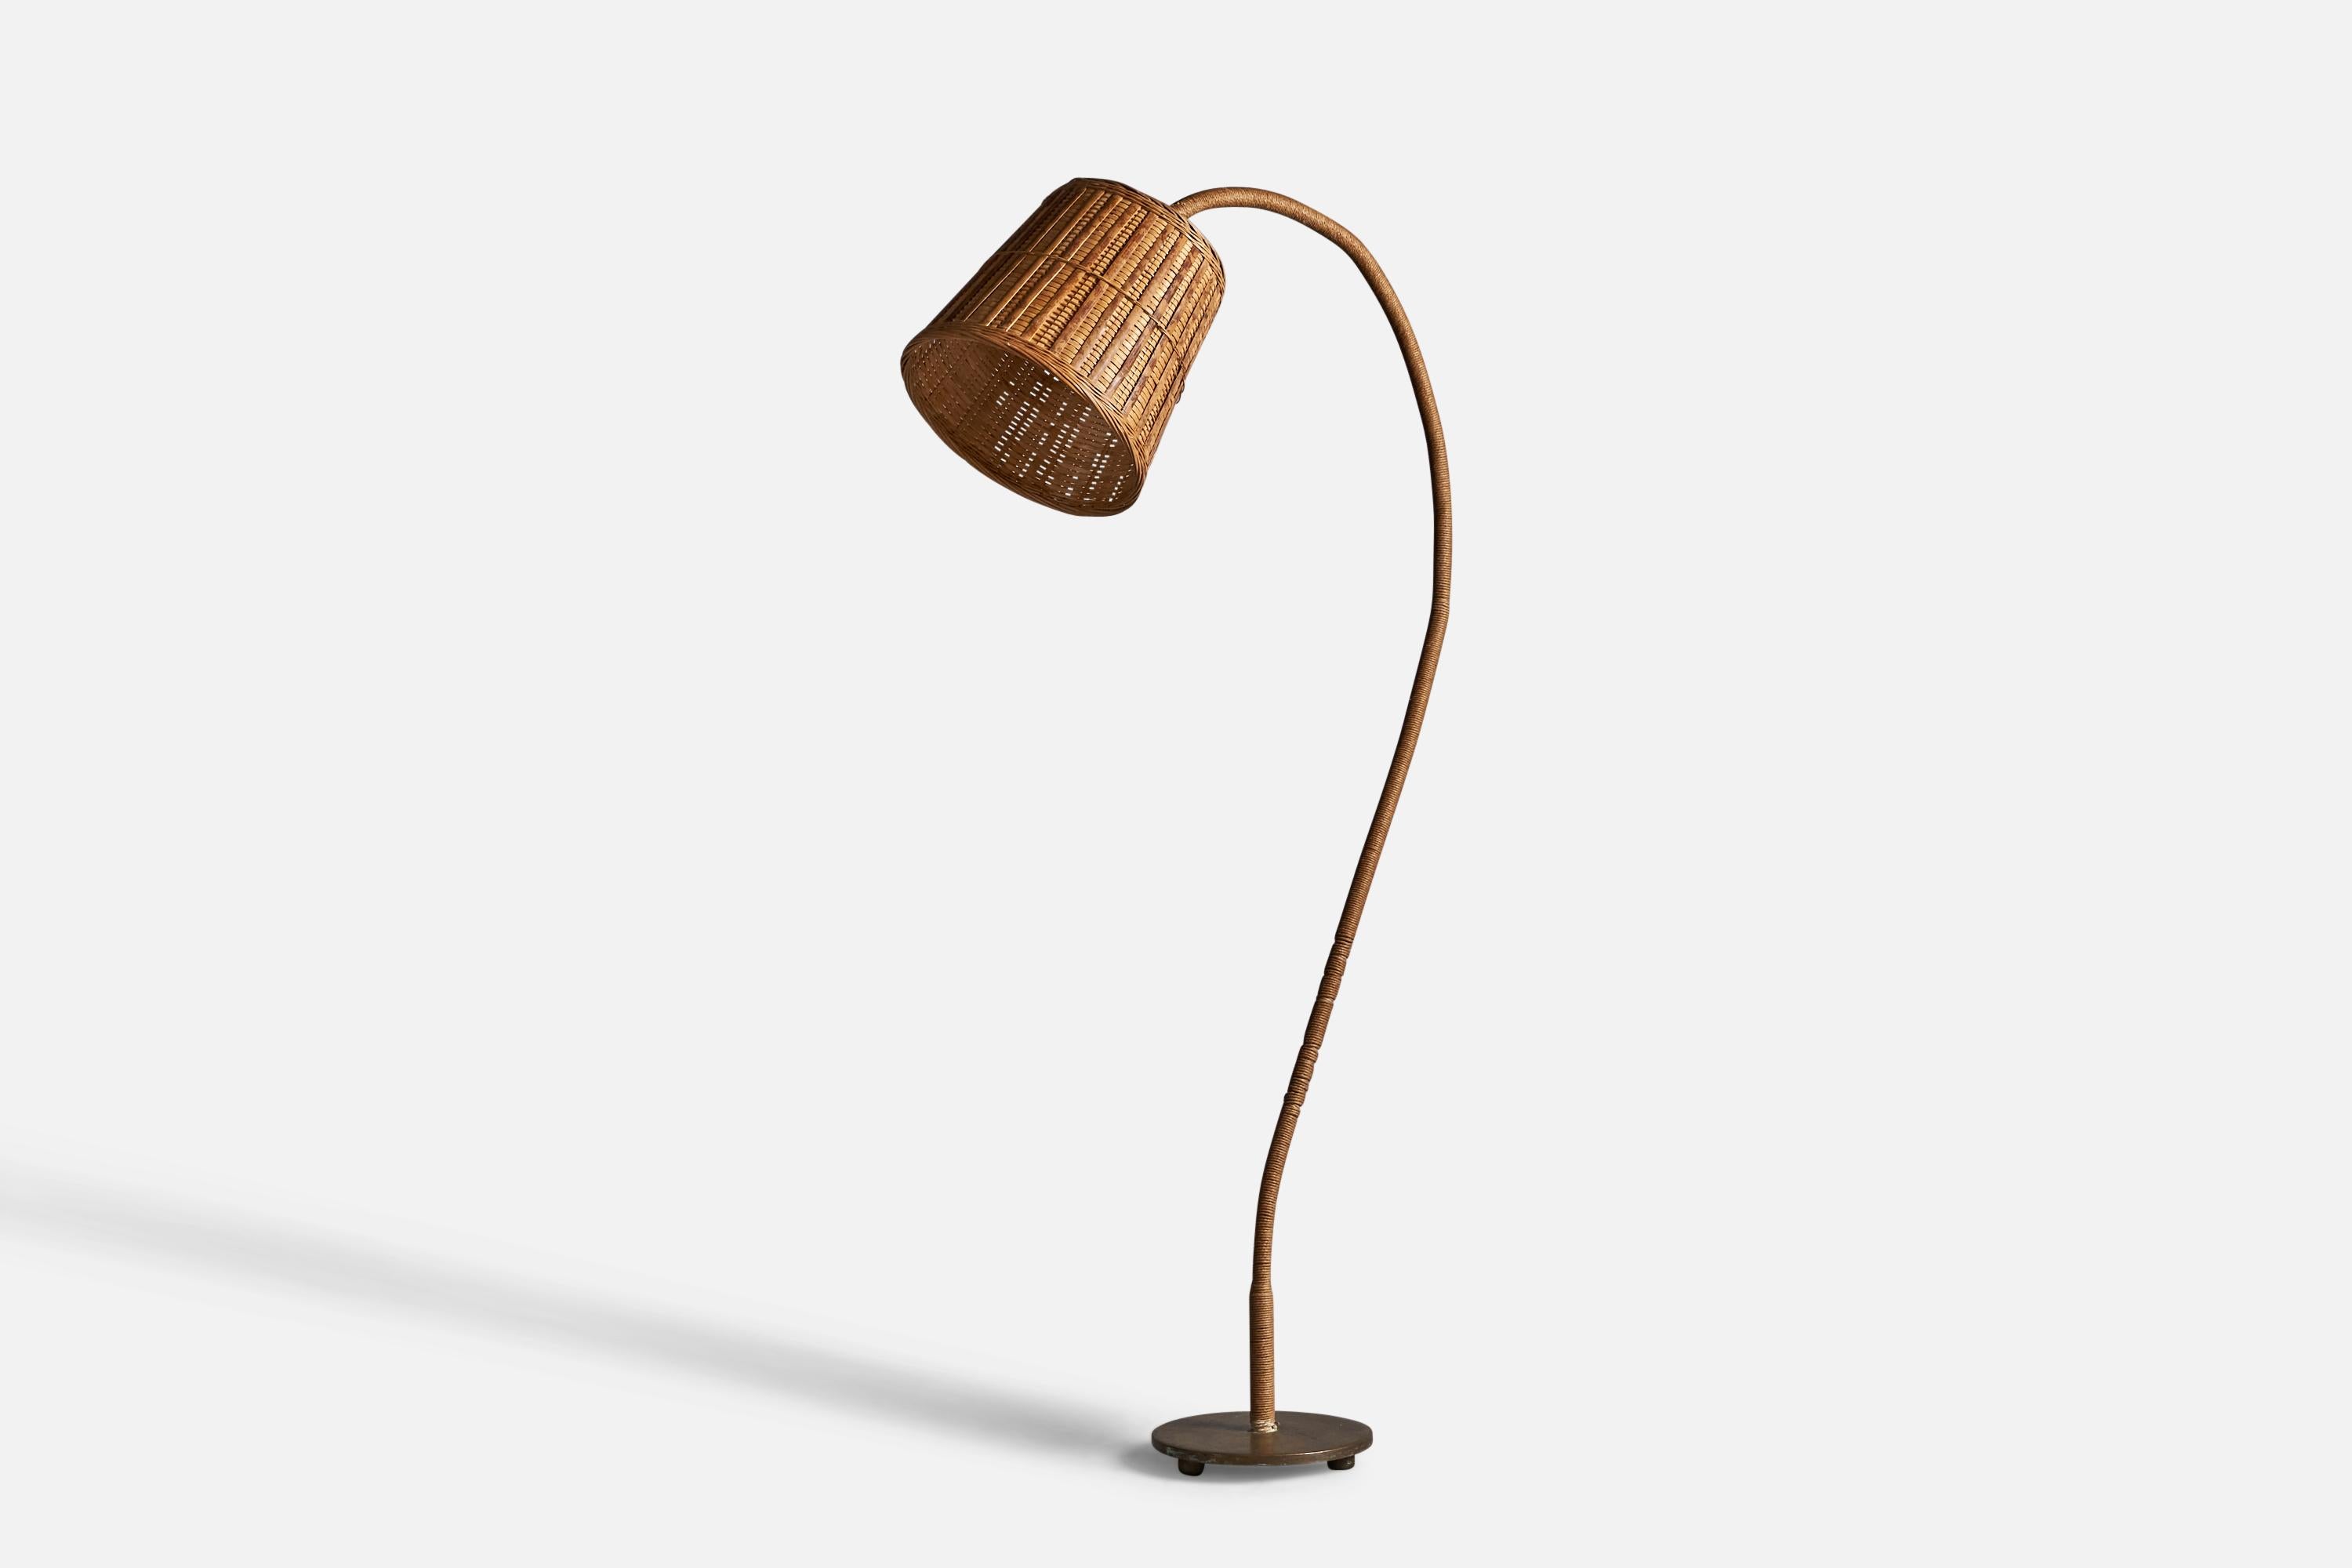 A curved rattan, cord, brass, and wood floor lamp, designed and produced in Sweden, 1930s.

Overall Dimensions (inches): 59